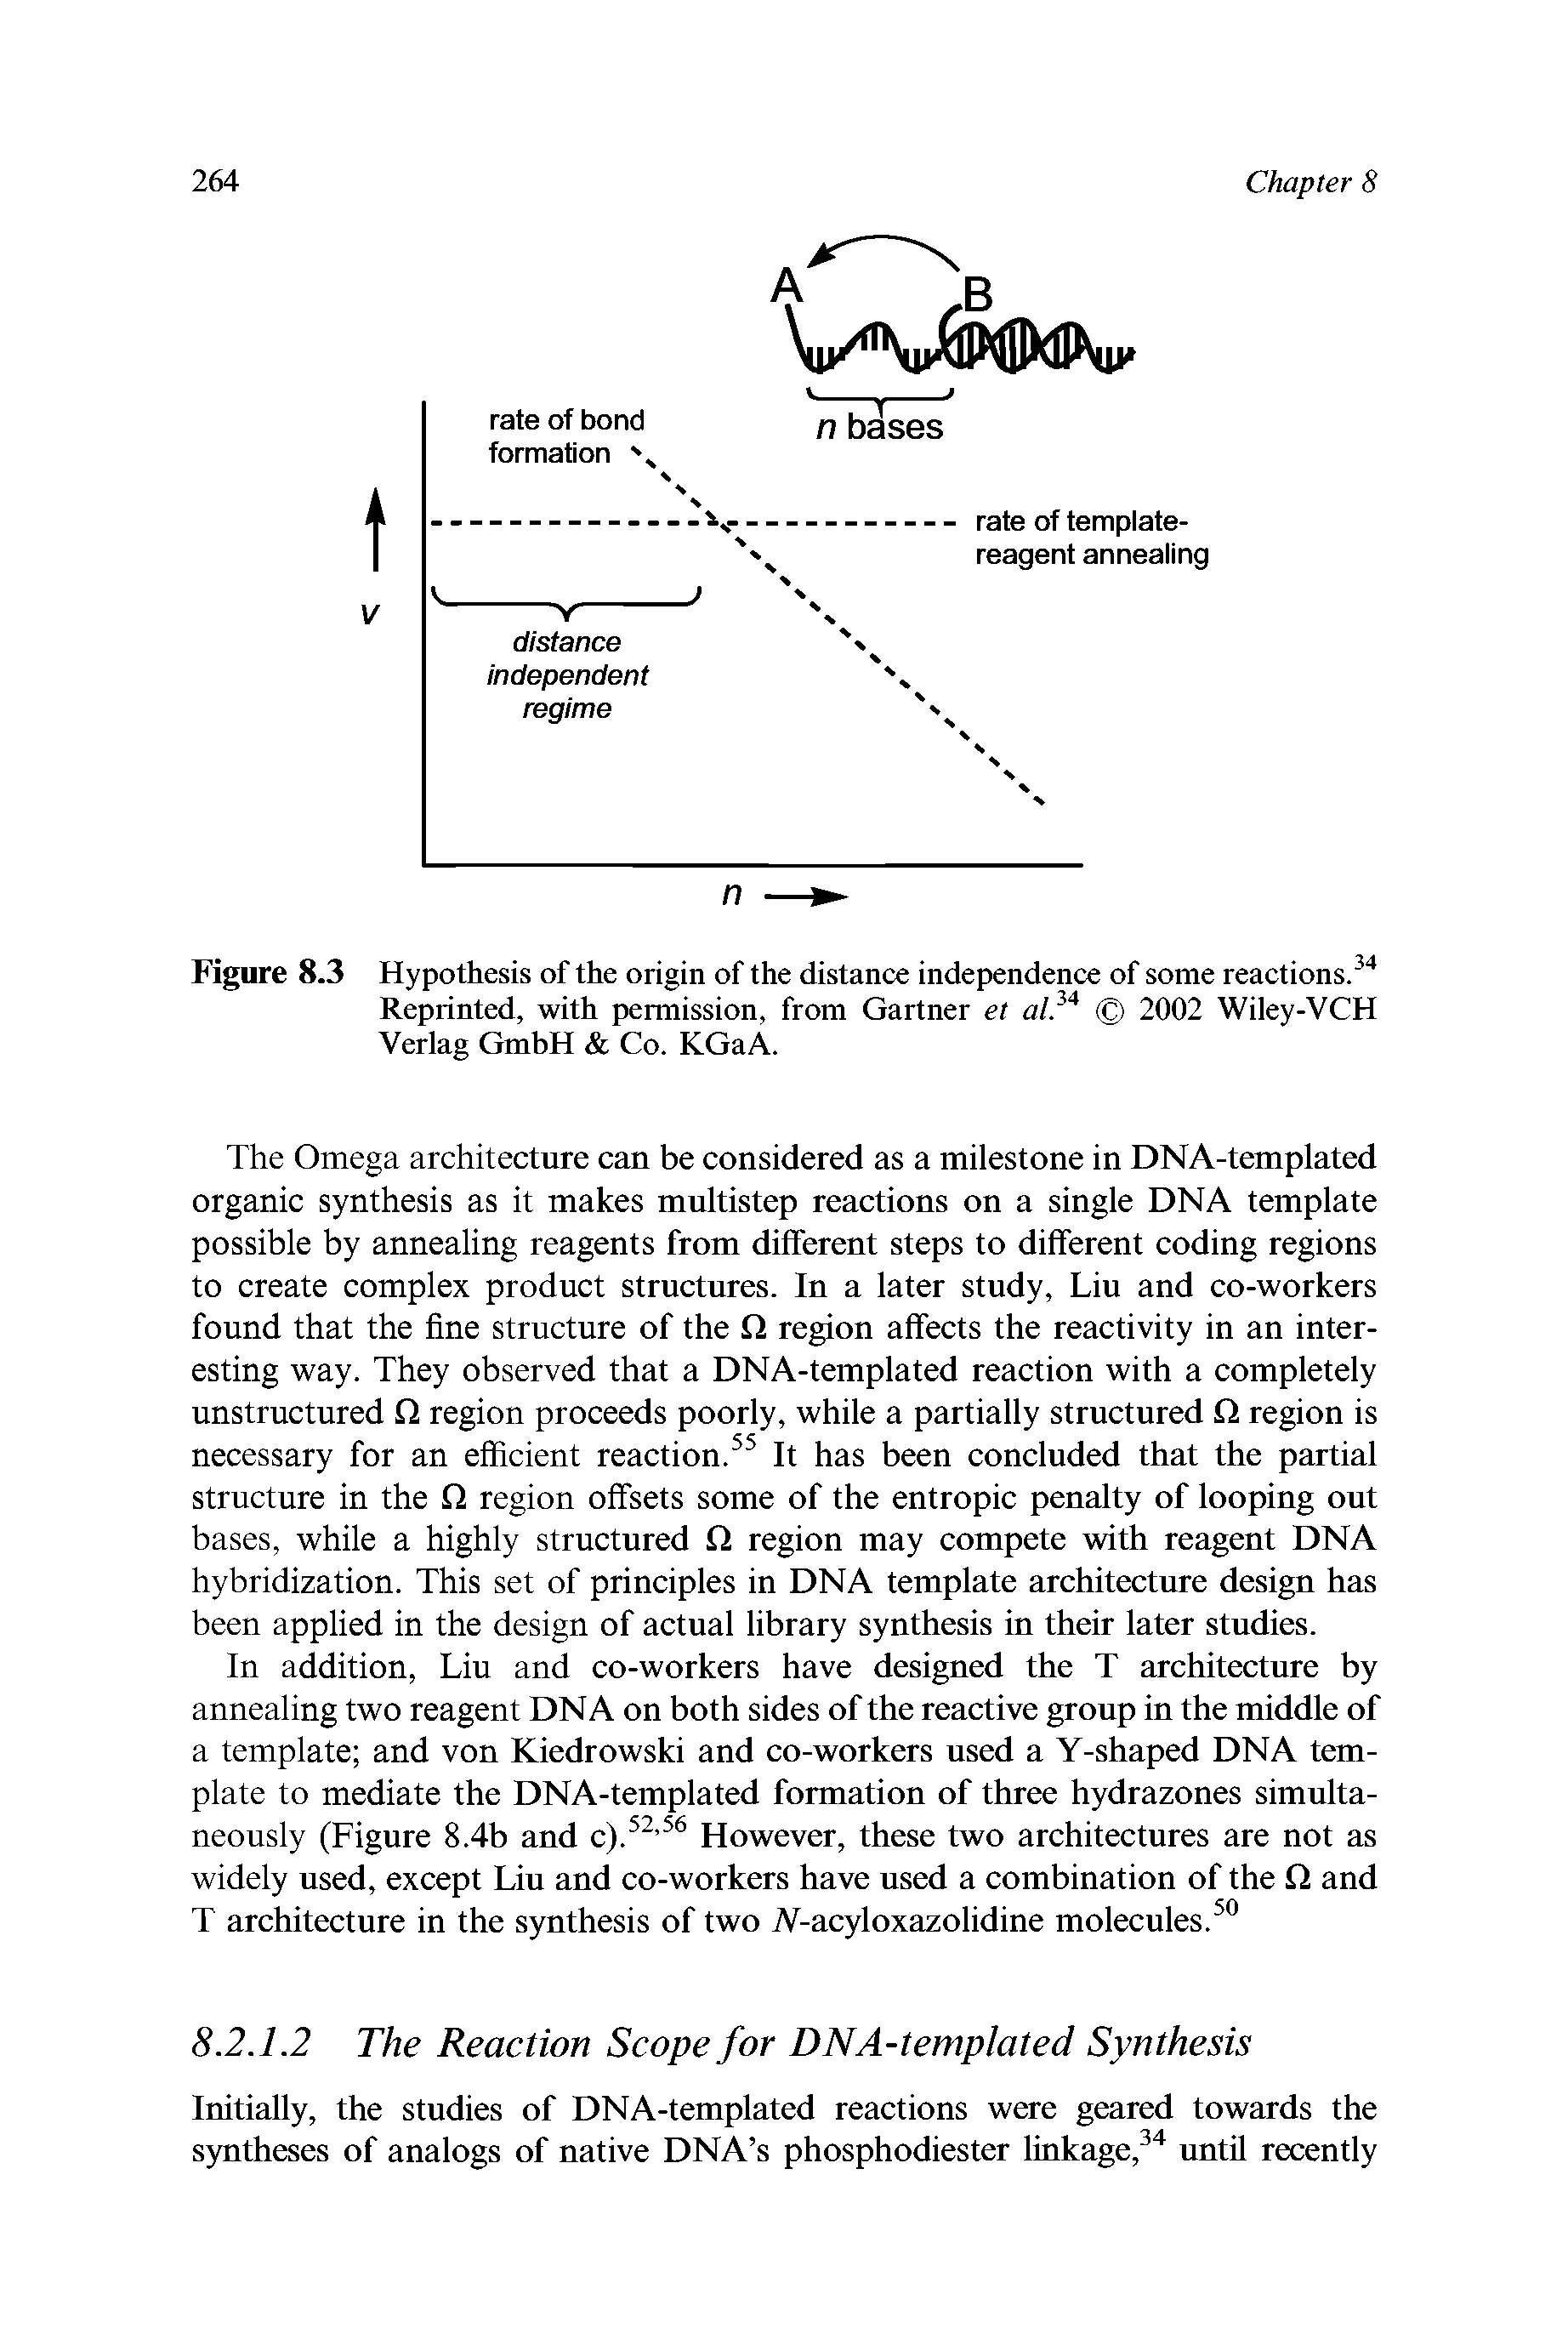 Figure 8.3 Hypothesis of the origin of the distance independence of some reactions. " Reprinted, with permission, from Gartner et al 2002 Wiley-VCH Verlag GmbH Co. KGaA.